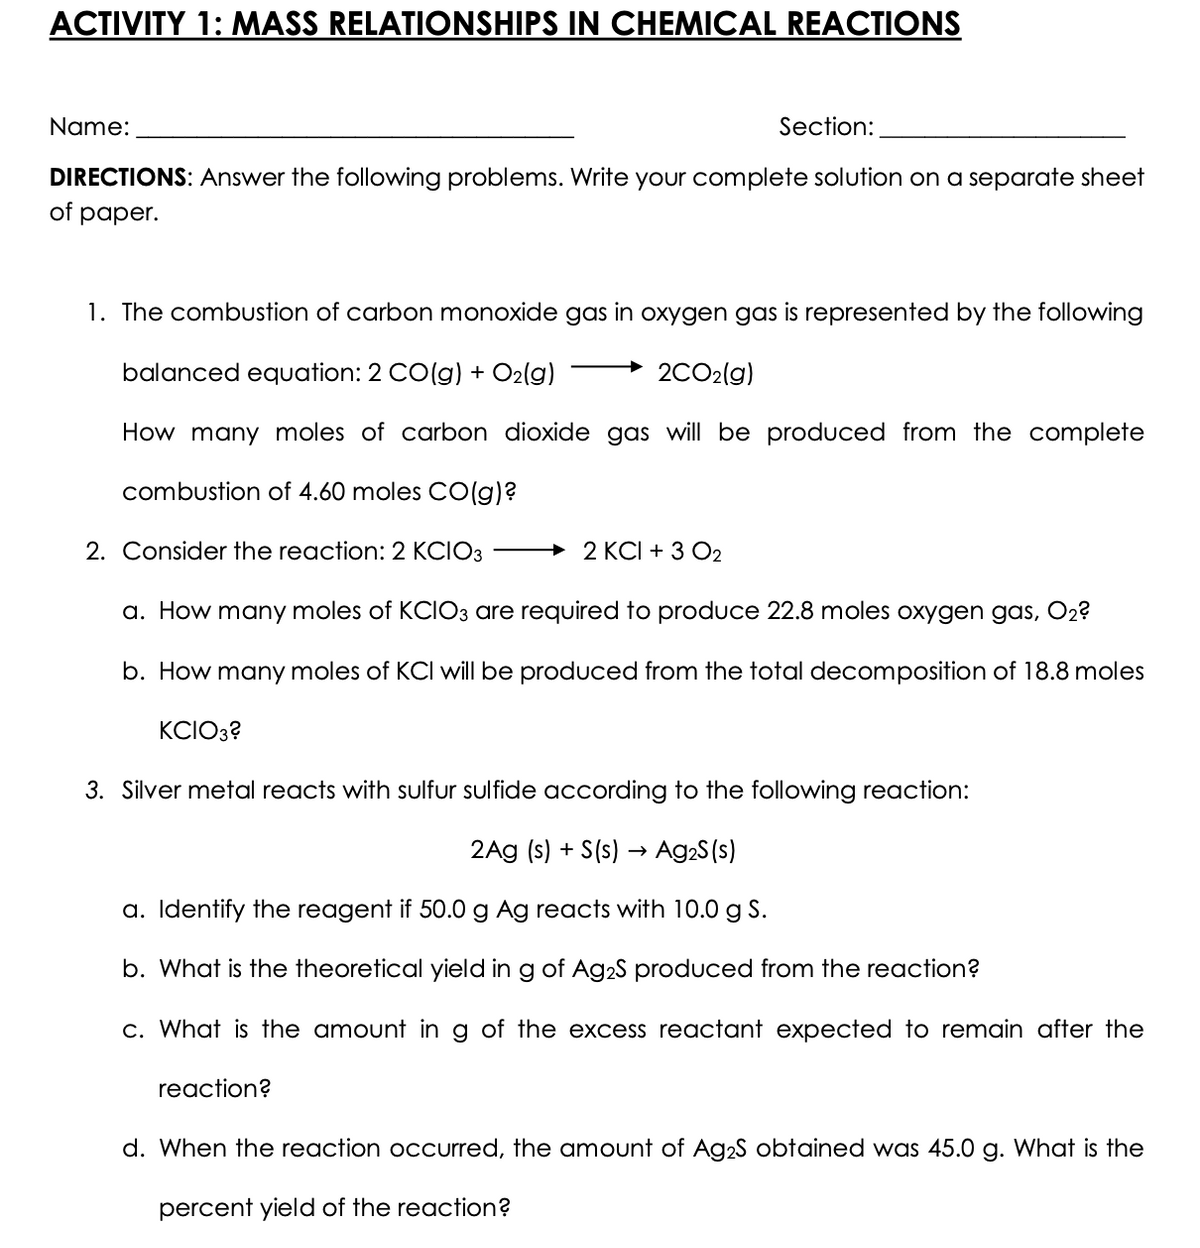 ACTIVITY 1: MASS RELATIONSHIPS IN CHEMICAL REACTIONS
Name:
Section:
DIRECTIONS: Answer the following problems. Write your complete solution on a separate sheet
of paper.
1. The combustion of carbon monoxide gas in oxygen gas is represented by the following
balanced equation: 2 CO(g) + O2(g)
2CO2(g)
How many moles of carbon dioxide gas will be produced from the complete
combustion of 4.60 moles CO(g)?
2. Consider the reaction: 2 KCIO3
+ 2 KCI + 3 O2
a. How many moles of KCIO3 are required to produce 22.8 moles oxygen gas, O2?
b. How many moles of KCI will be produced from the total decomposition of 18.8 moles
KCIO3?
3. Silver metal reacts with sulfur sulfide according to the following reaction:
2Ag (s) + S(s) → Ag2S (s)
a. Identify the reagent if 50.0g Ag reacts with 10.0 g S.
b. What is the theoretical yield in g of Ag2S produced from the reaction?
c. What is the amount in g of the excess reactant expected to remain after the
reaction?
d. When the reaction occurred, the amount of Ag2S obtained was 45.0 g. What is the
percent yield of the reaction?
